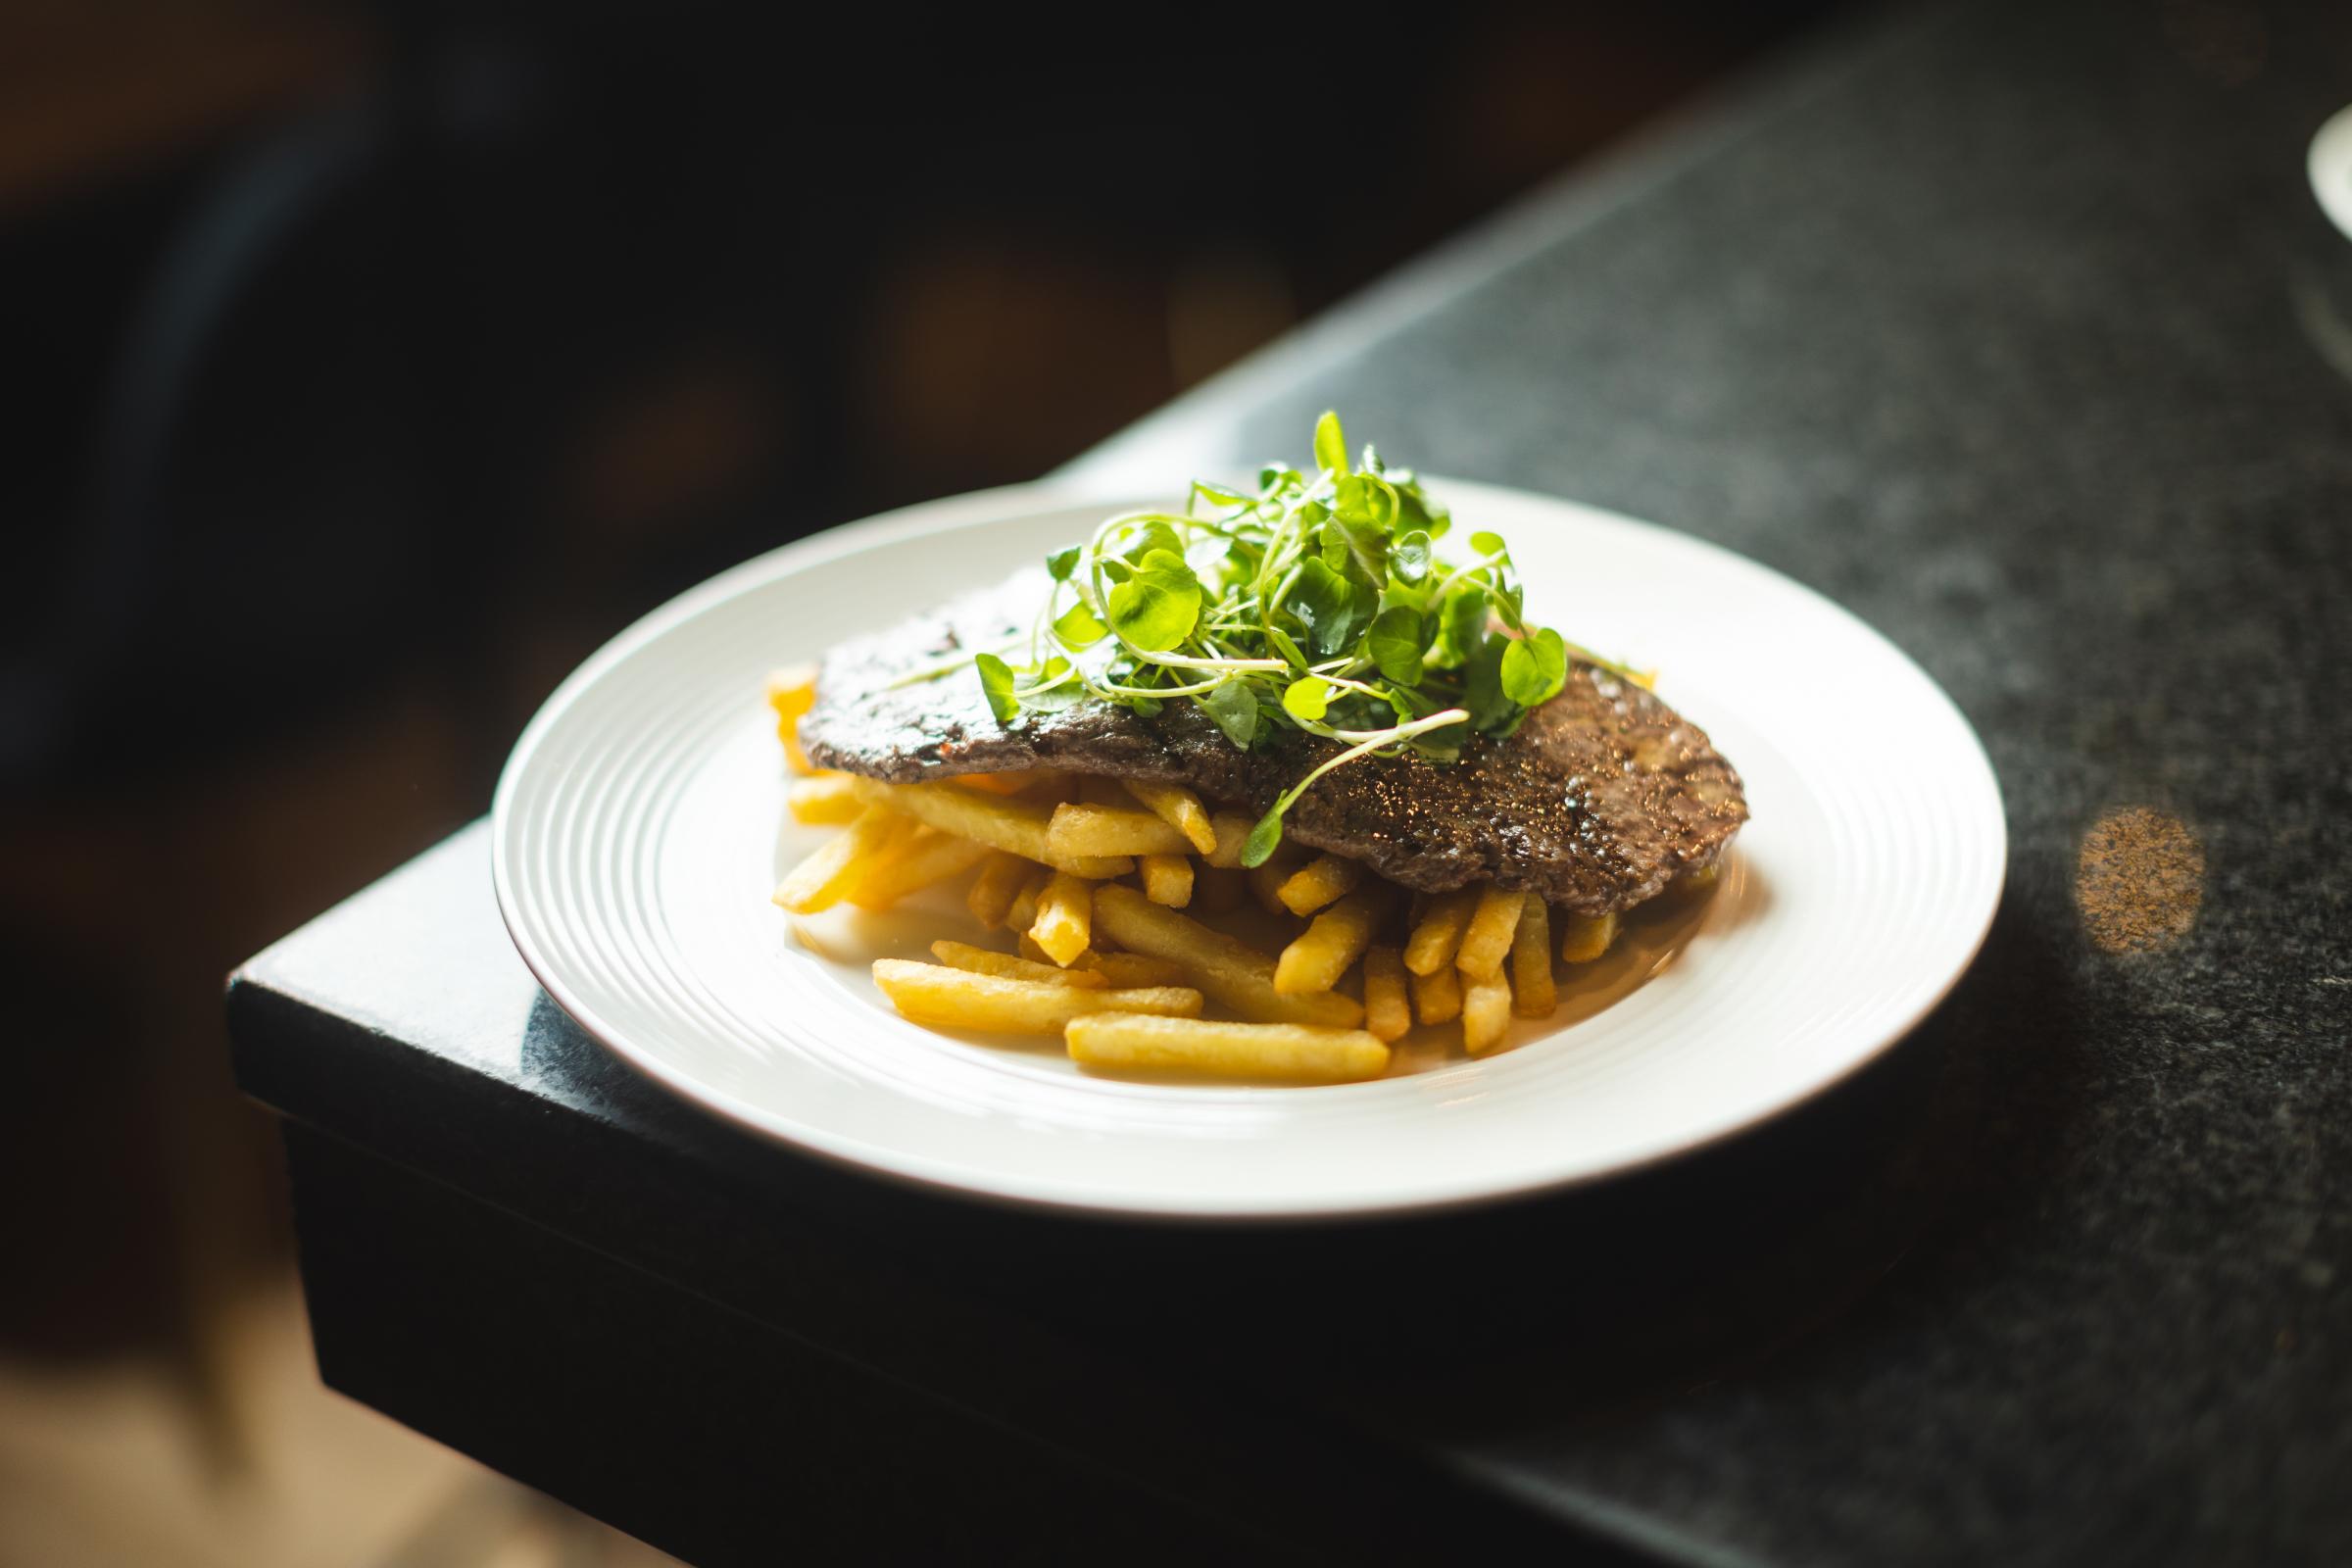 Steak frites - flattened 6oz rum steak with French fries and garlic butter